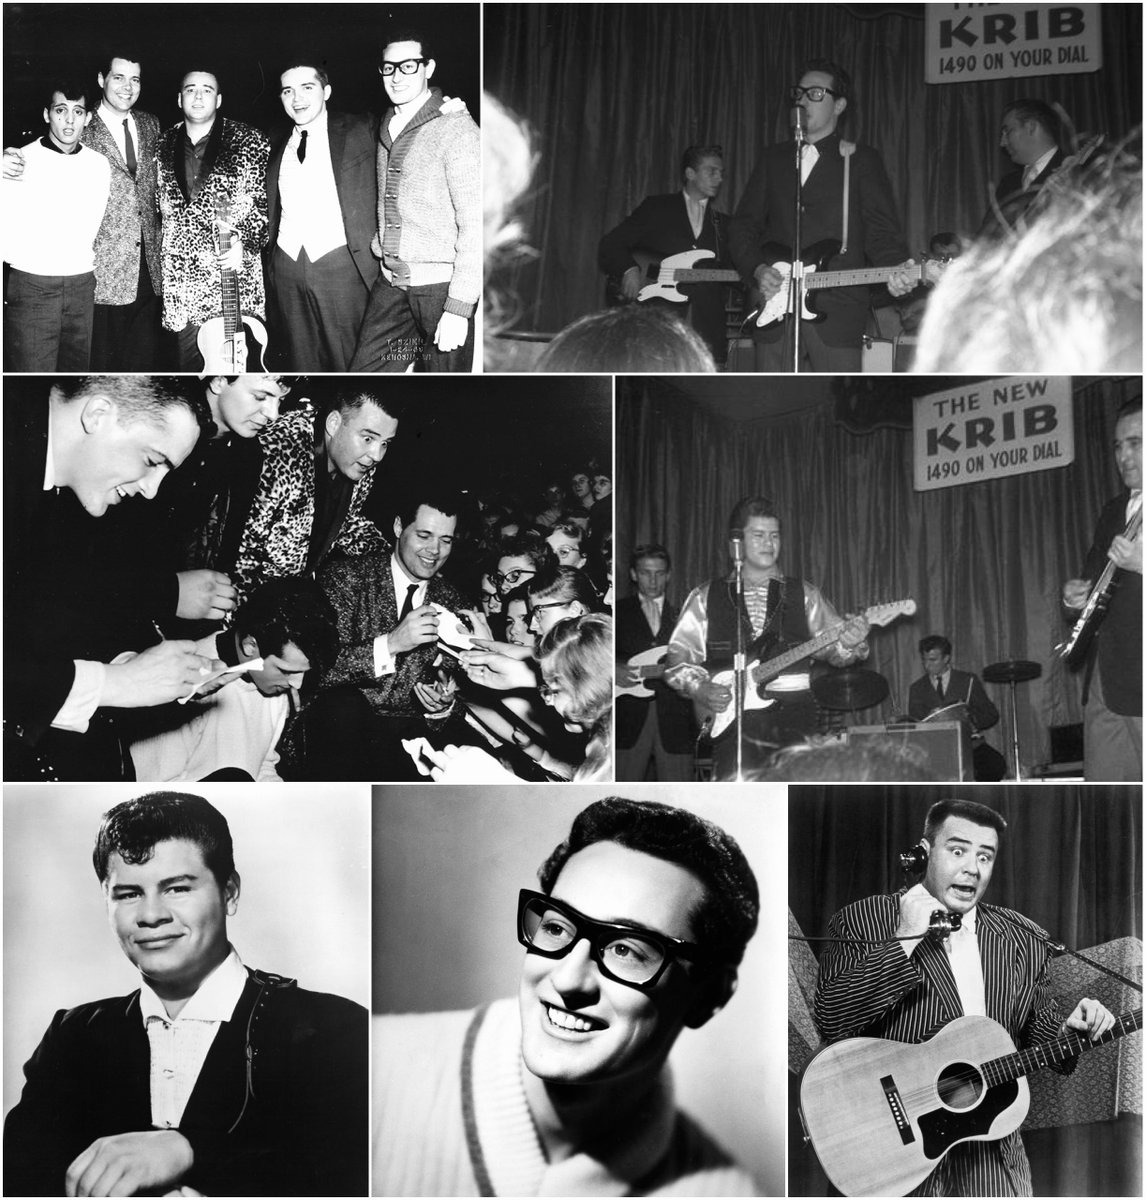 The day the music died - February 3rd 1959.
#buddyholly #bigbopper #ritchievalens